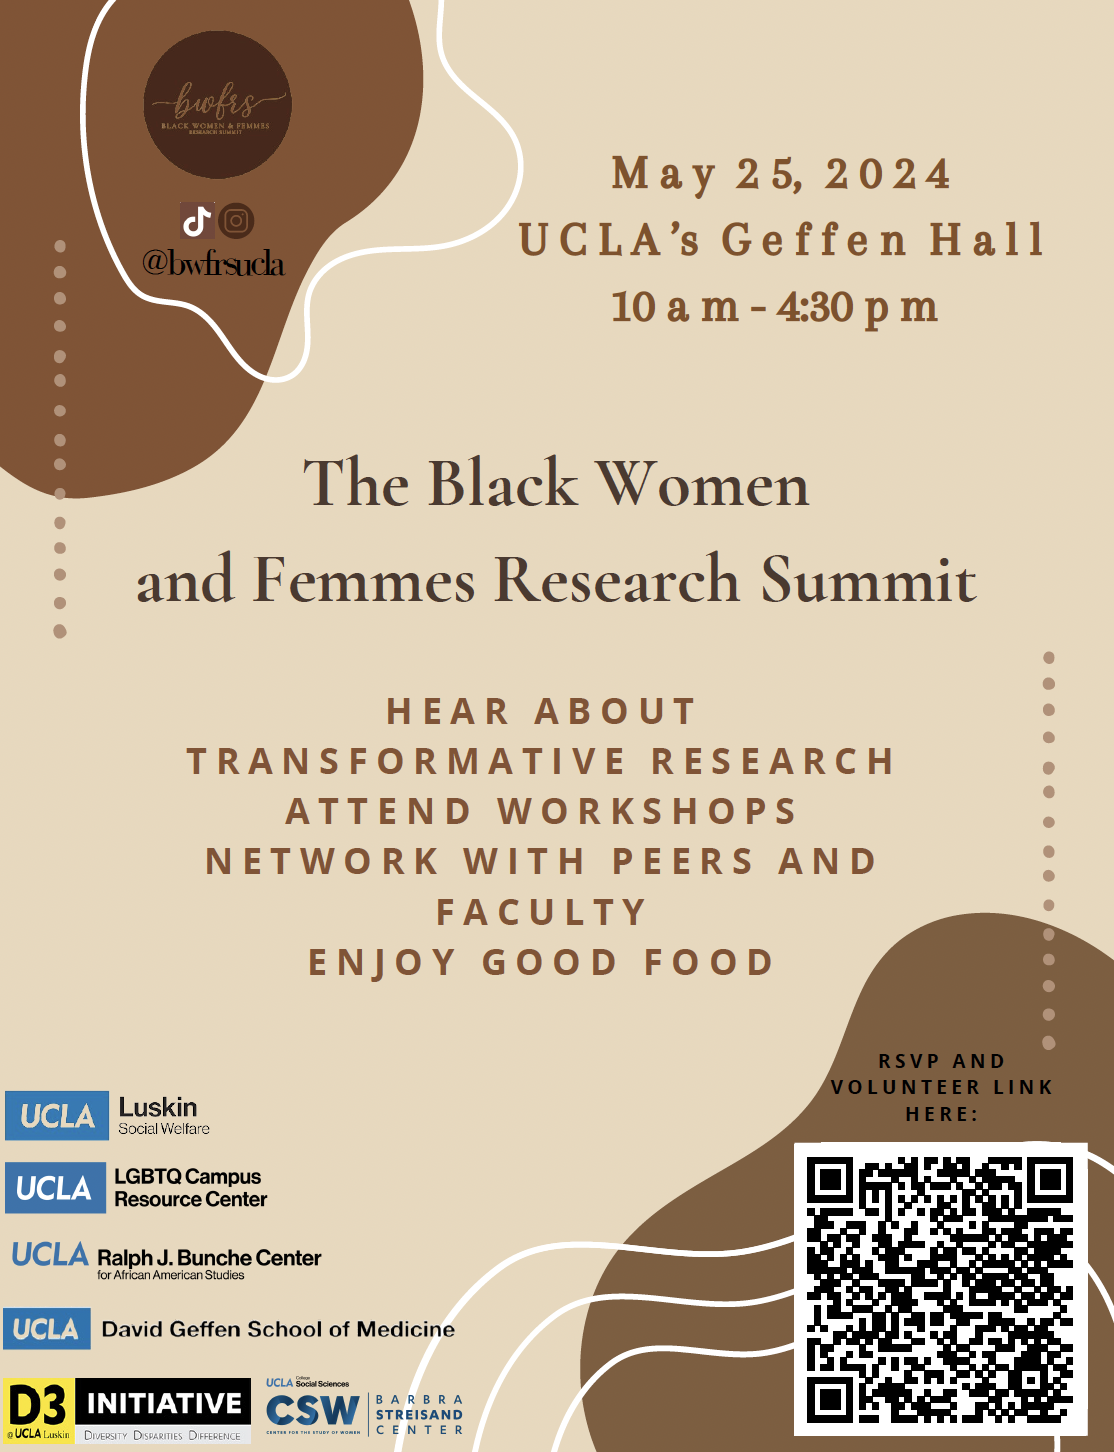 The Black Women and Femmes Research Summit